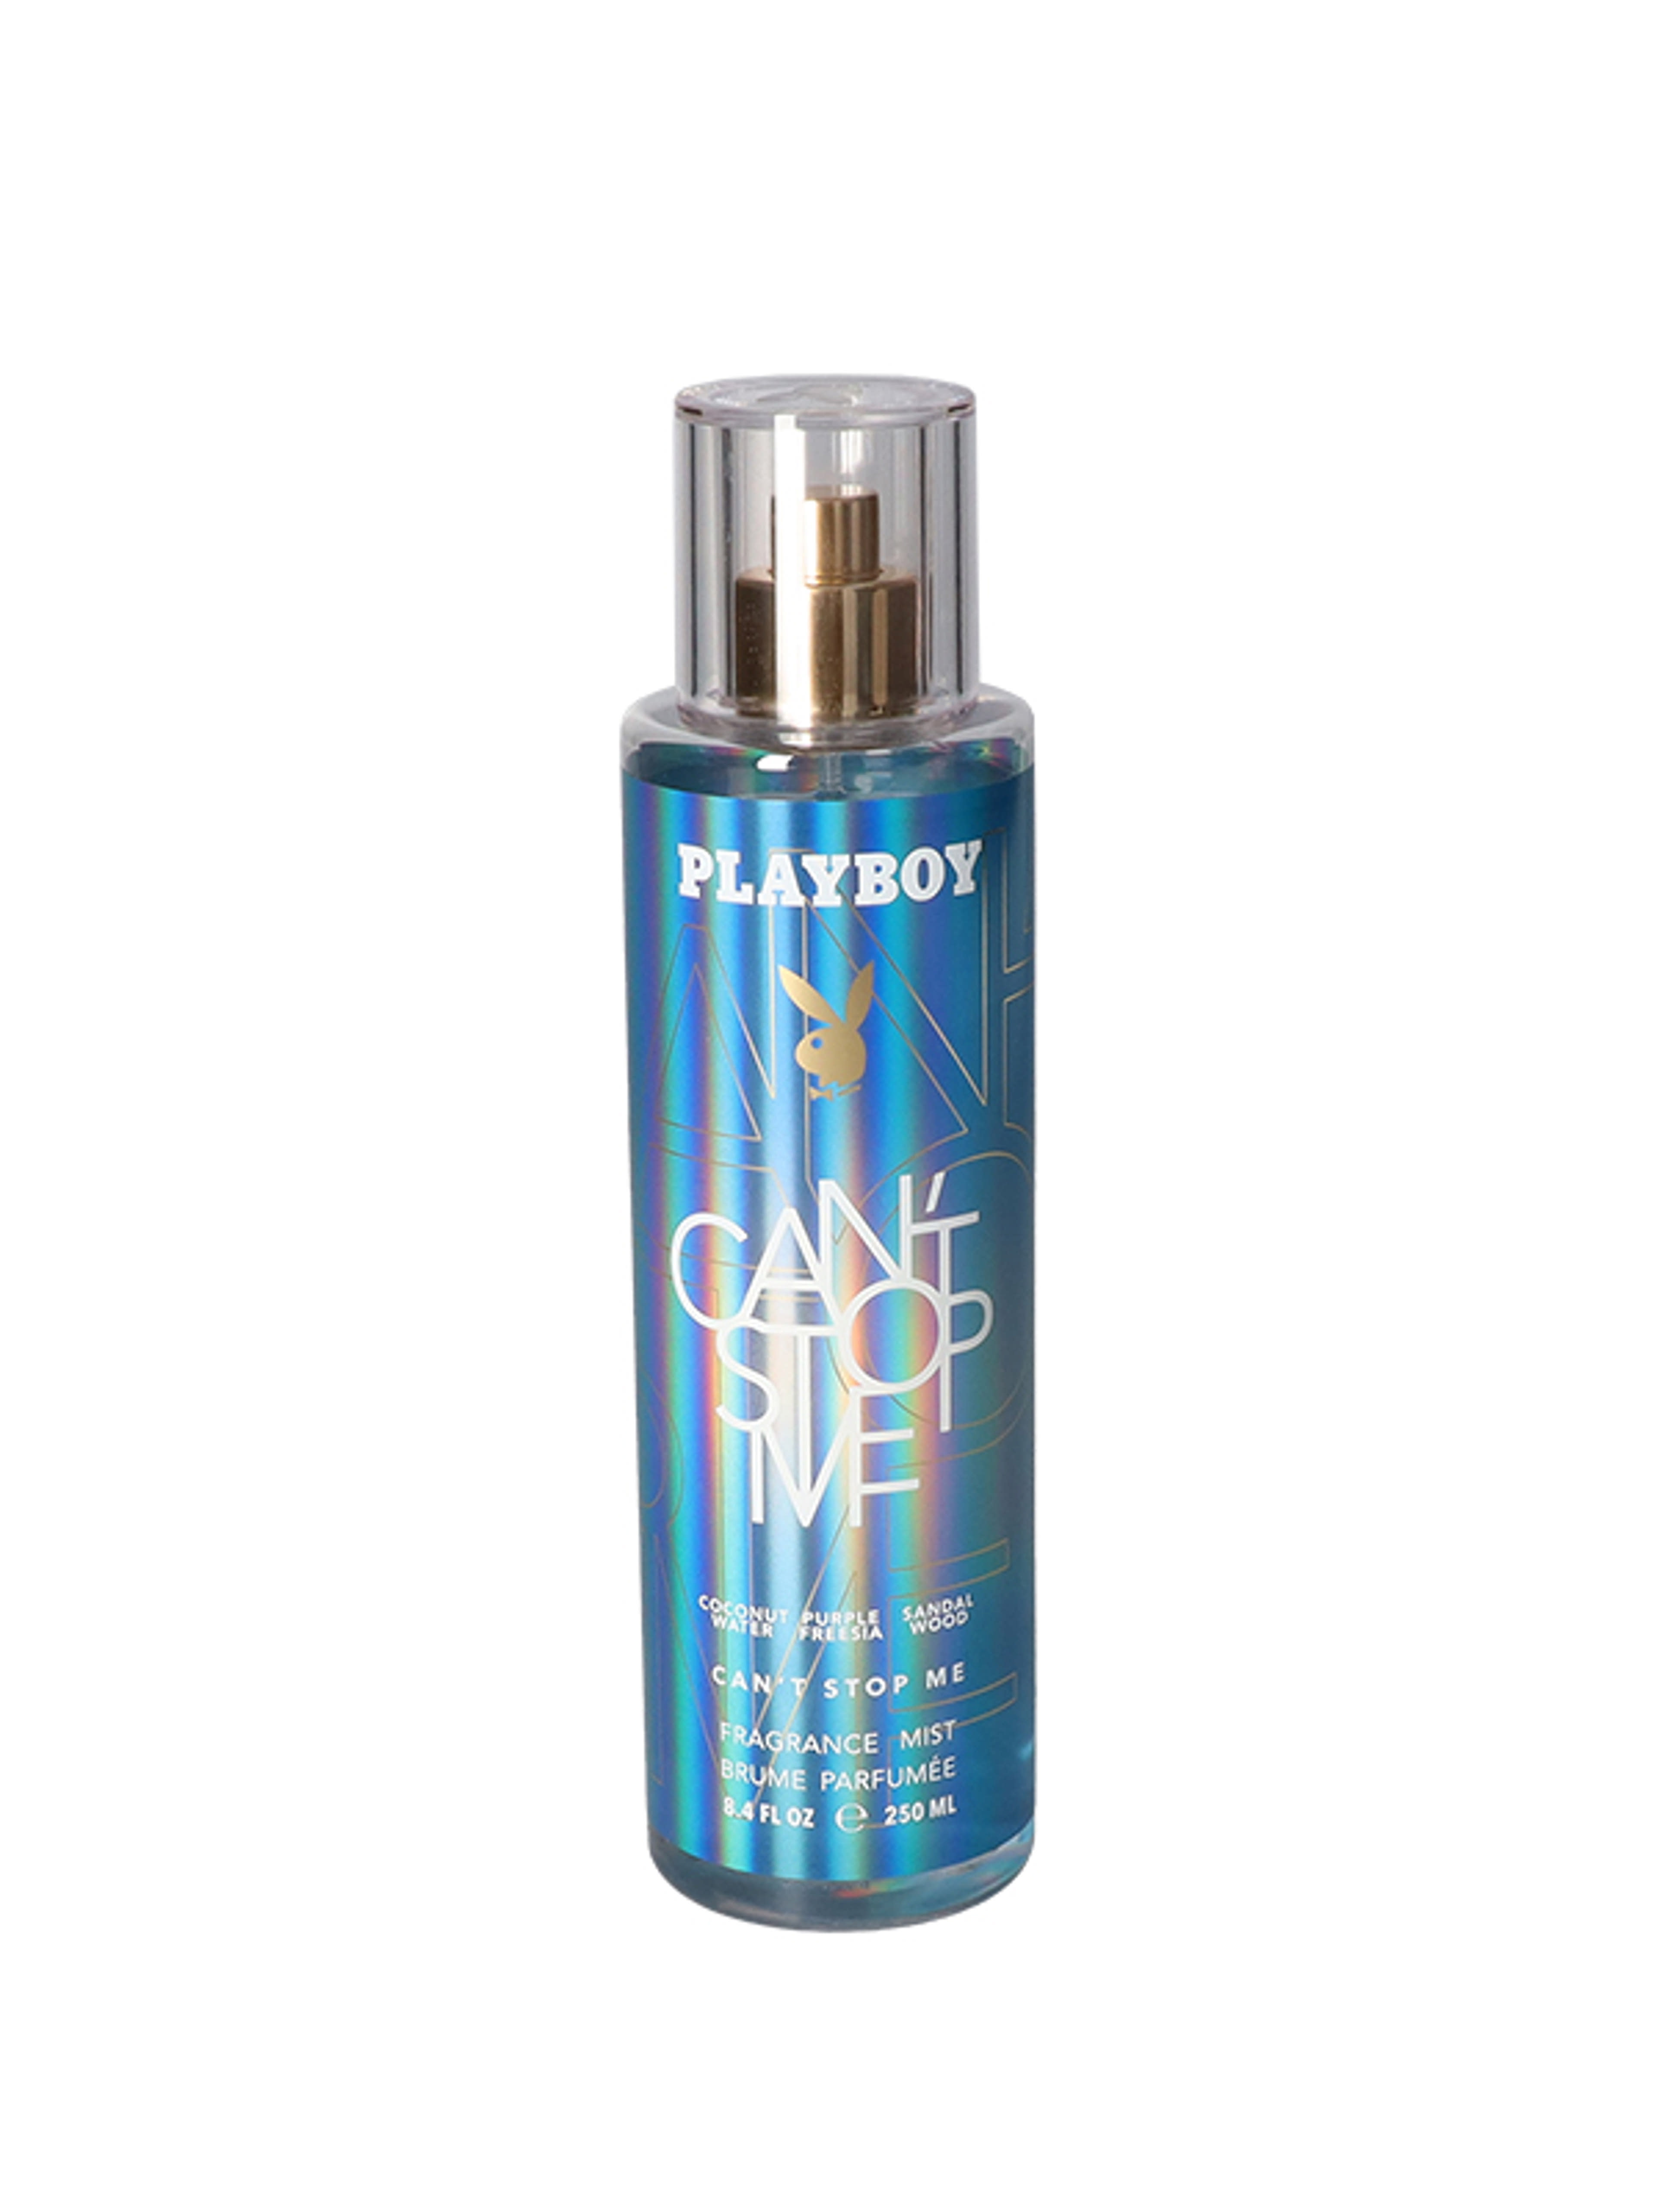 Playboy cant stop me body mist - 250 ml